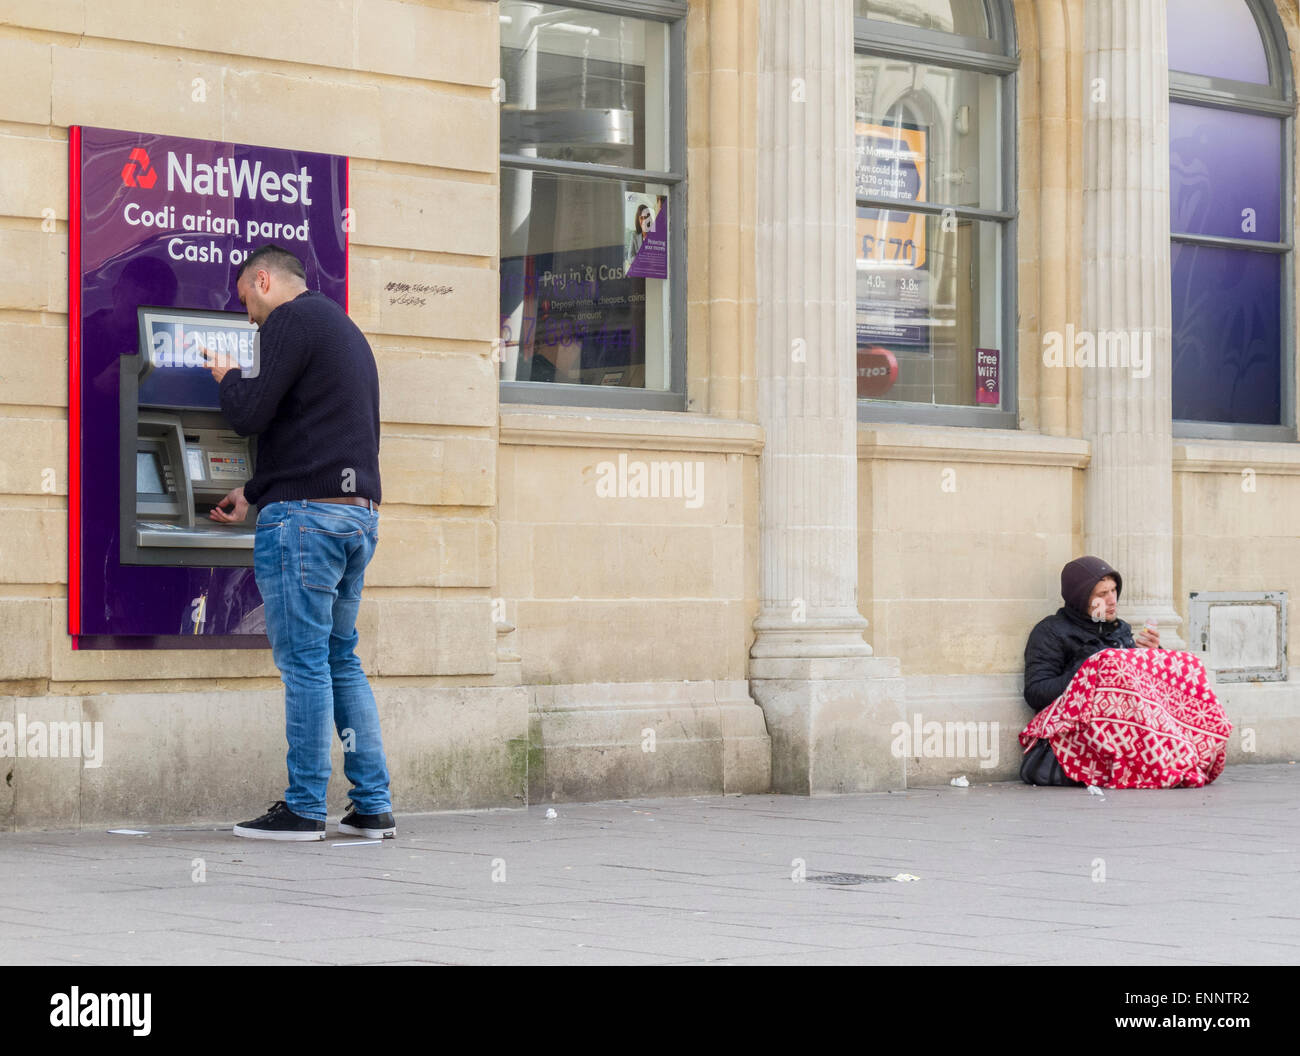 Beggar seated near a teller machine where cash is being withdrawn Stock Photo